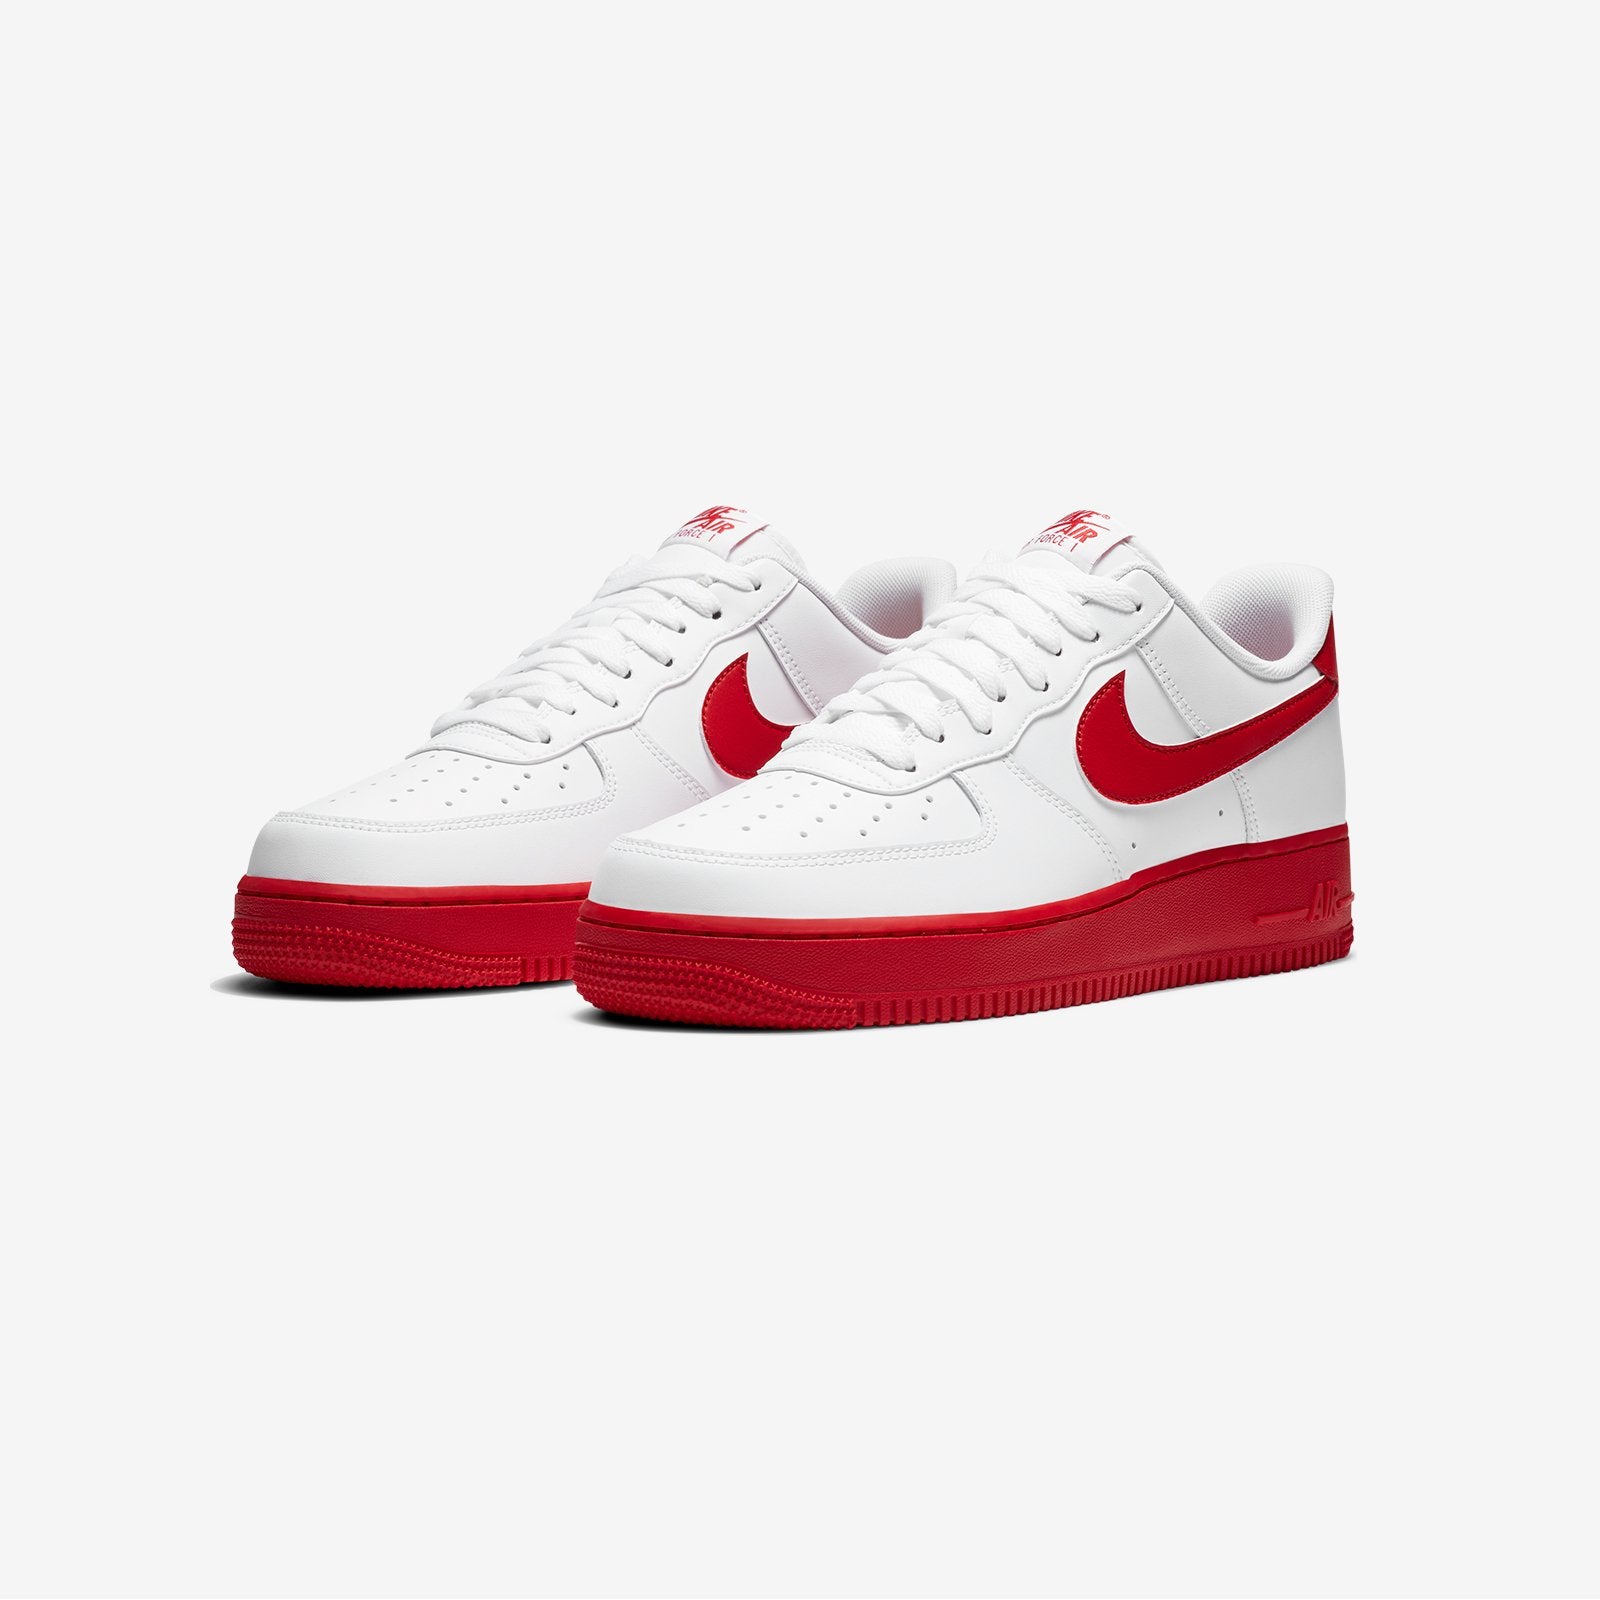 nike air force university red